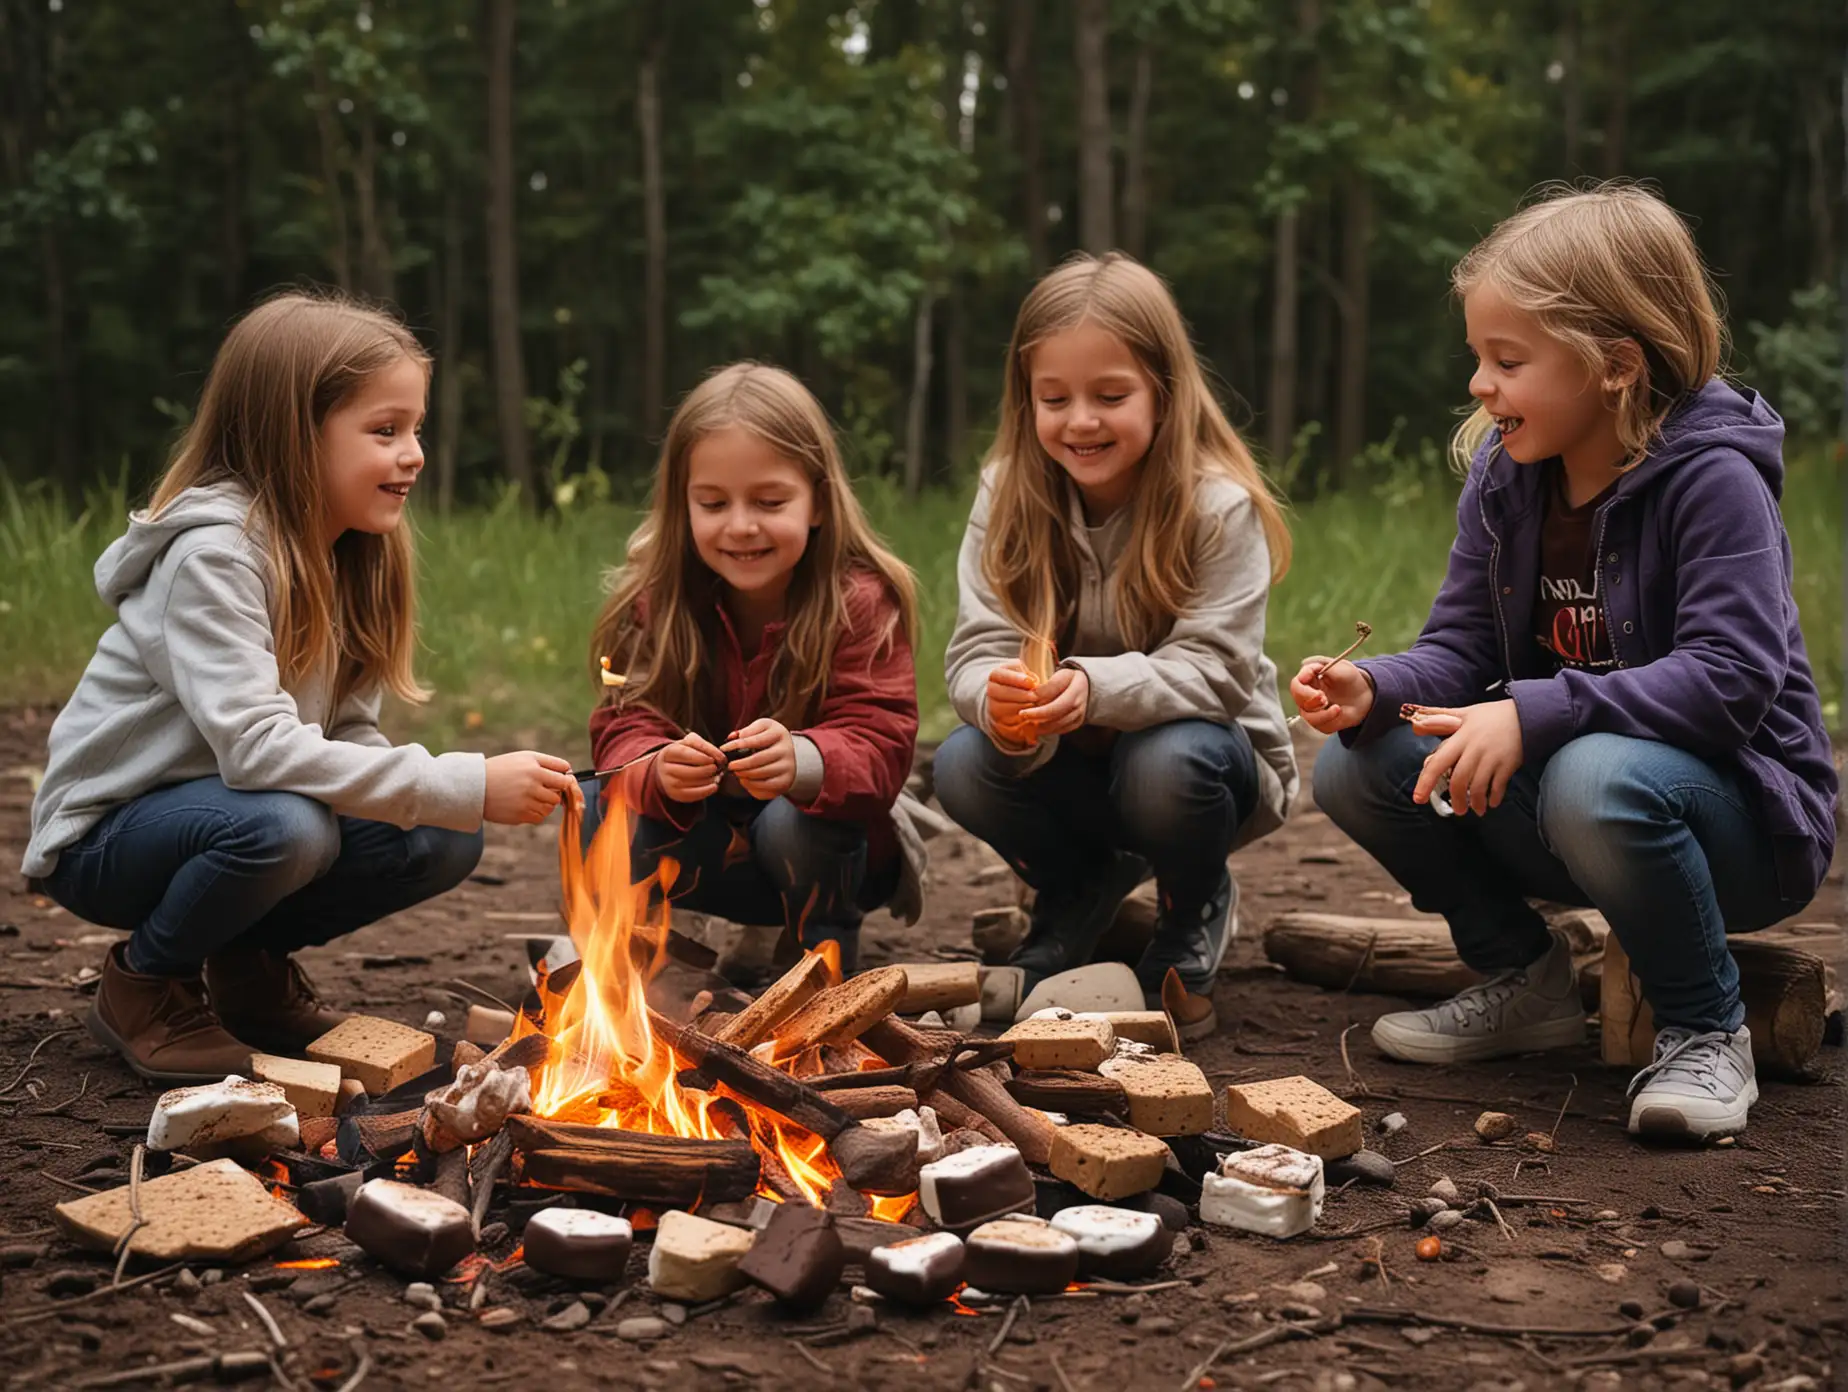 Children Making Smores by Campfire Outdoor Family Activity